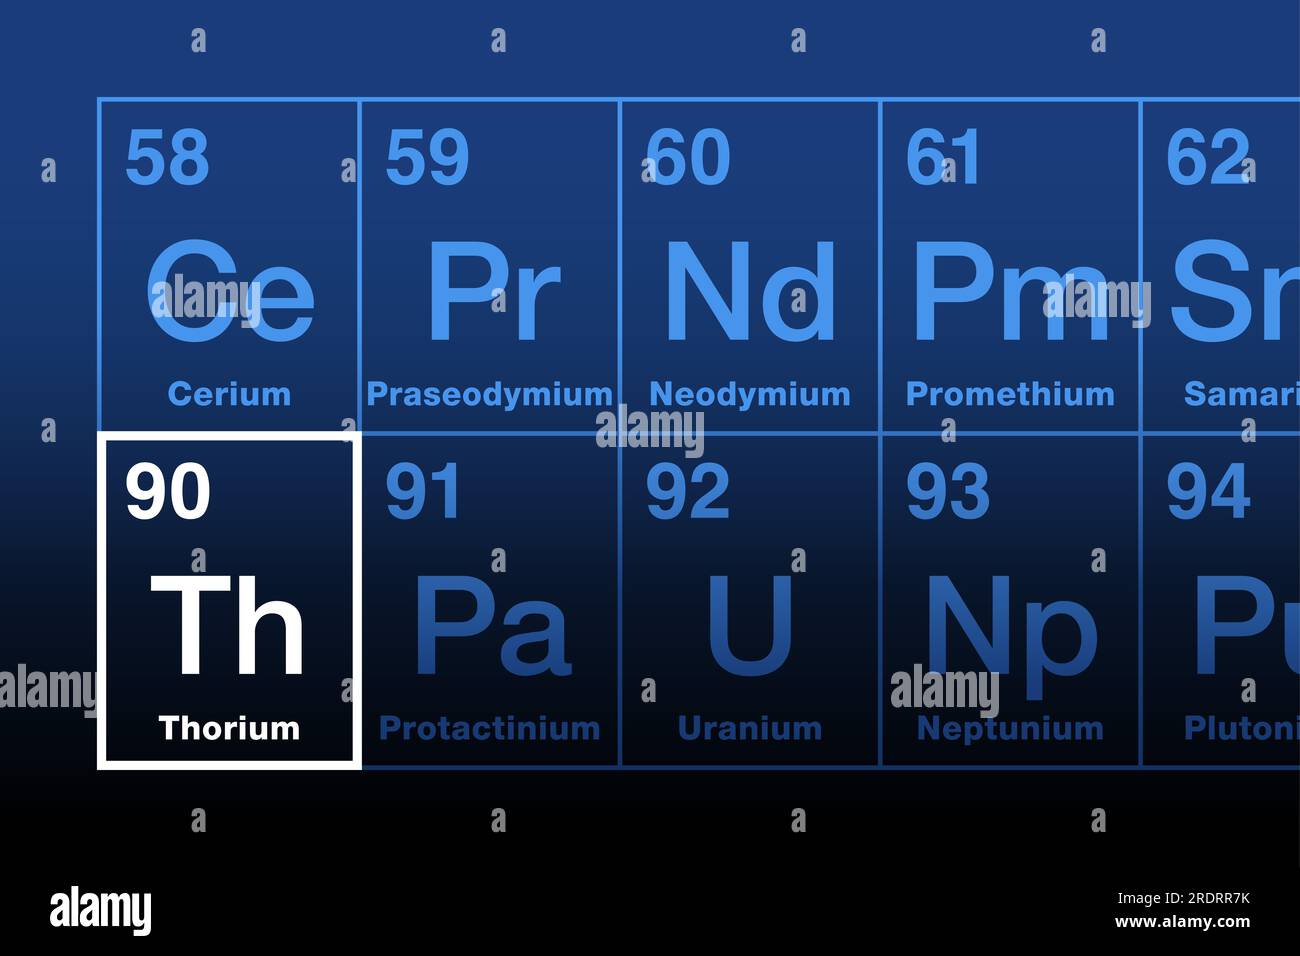 Thorium on periodic table of the elements, in the actinide series. Radioactive metallic element with atomic number 90, and with element symbol Th. Stock Photo